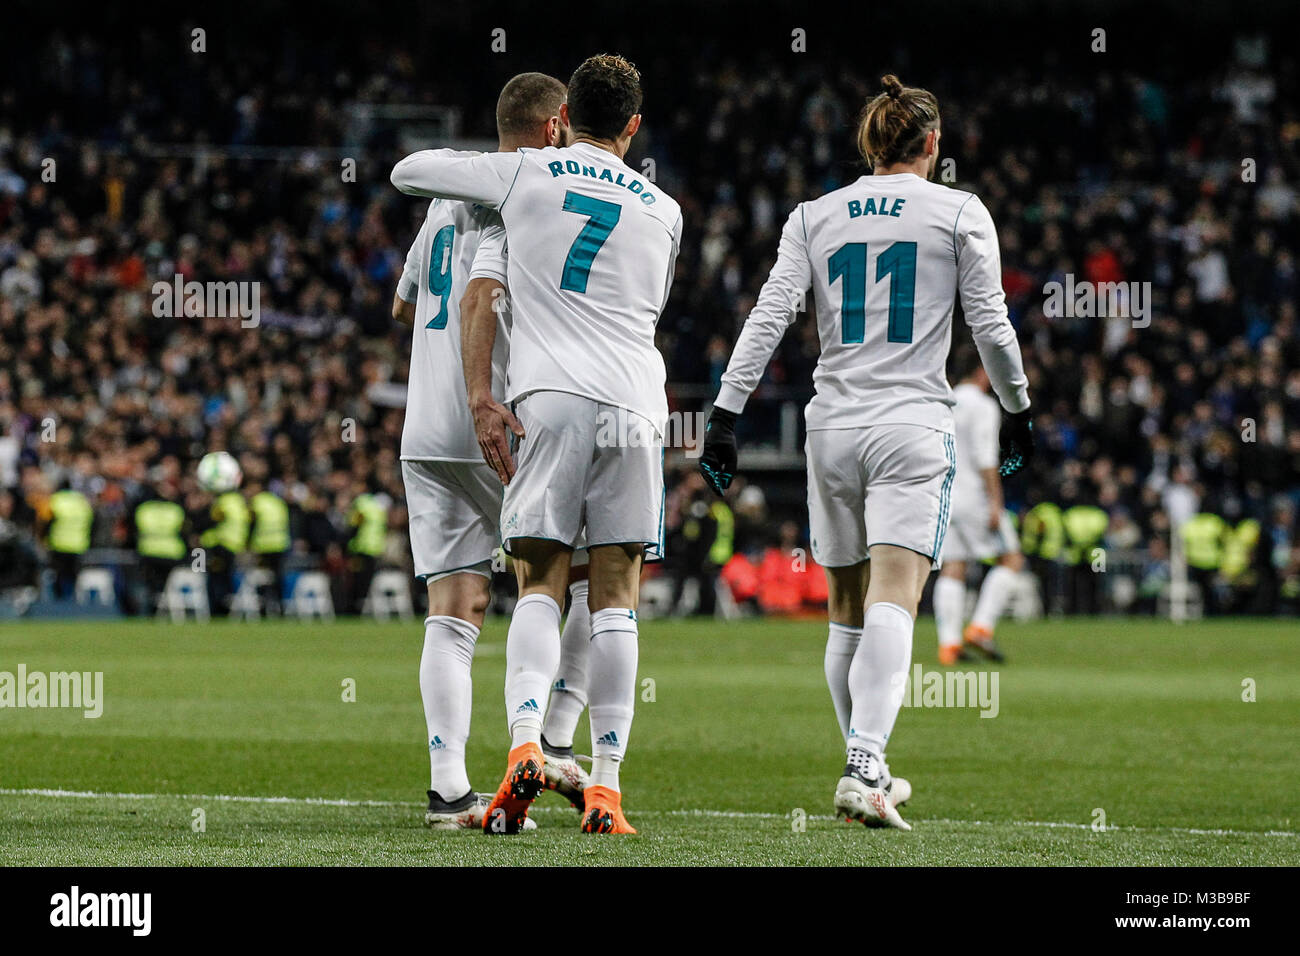 Cristiano Ronaldo (Real Madrid) celebrates his goal which made it (5, 1) with Karim Benzema (Real Madrid), Gareth Bale (Real Madrid), La Liga match between Real Madrid vs Real Sociedad at the Santiago Bernabeu stadium in Madrid, Spain, February 10, 2018. Credit: Gtres Información más Comuniación on line, S.L./Alamy Live News Stock Photo